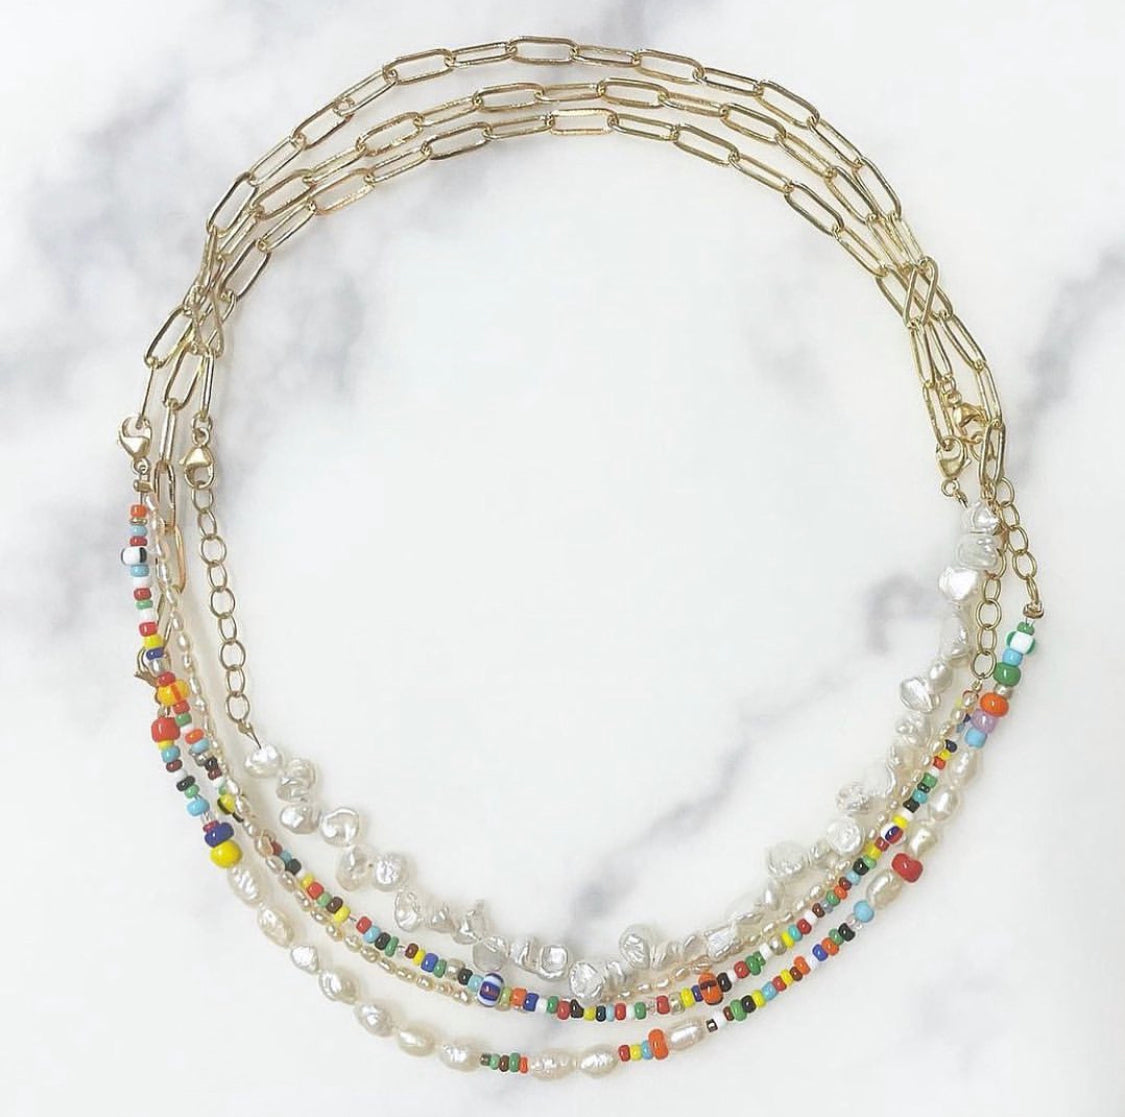 Two-In-One Choker